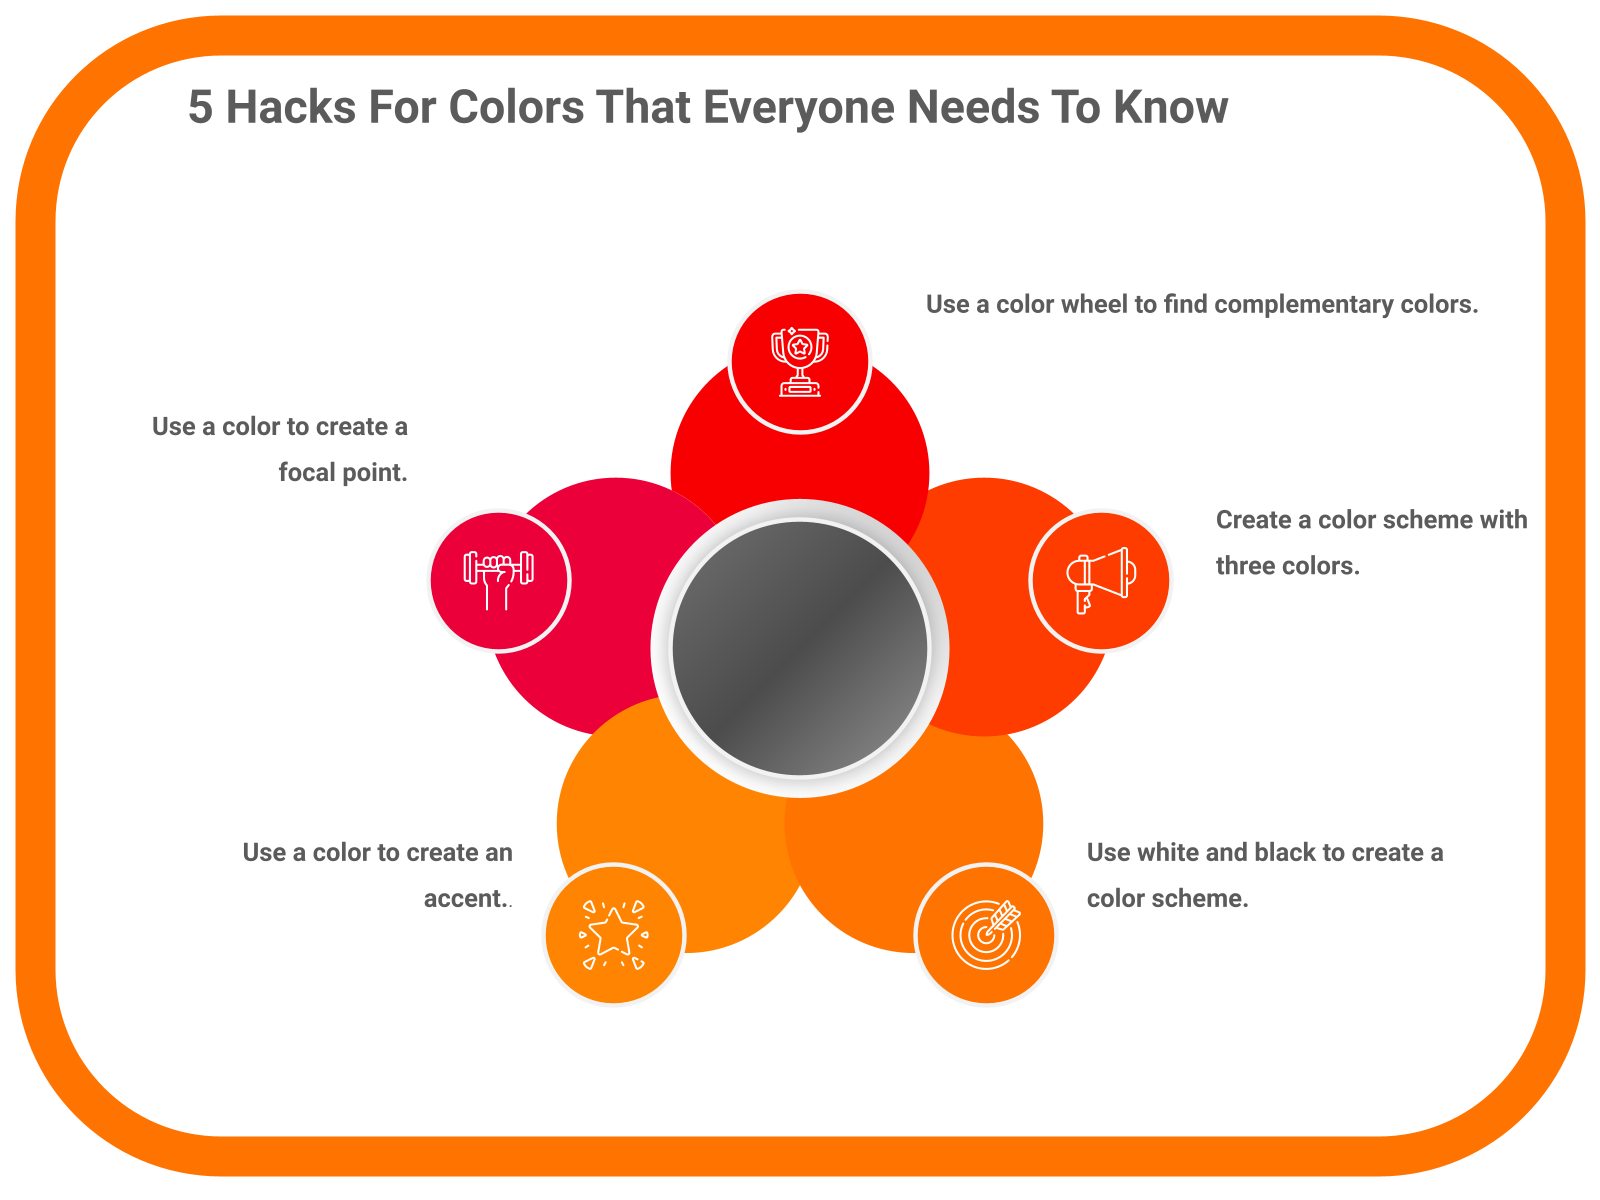 5 Hacks For Colors That Everyone Needs To Know